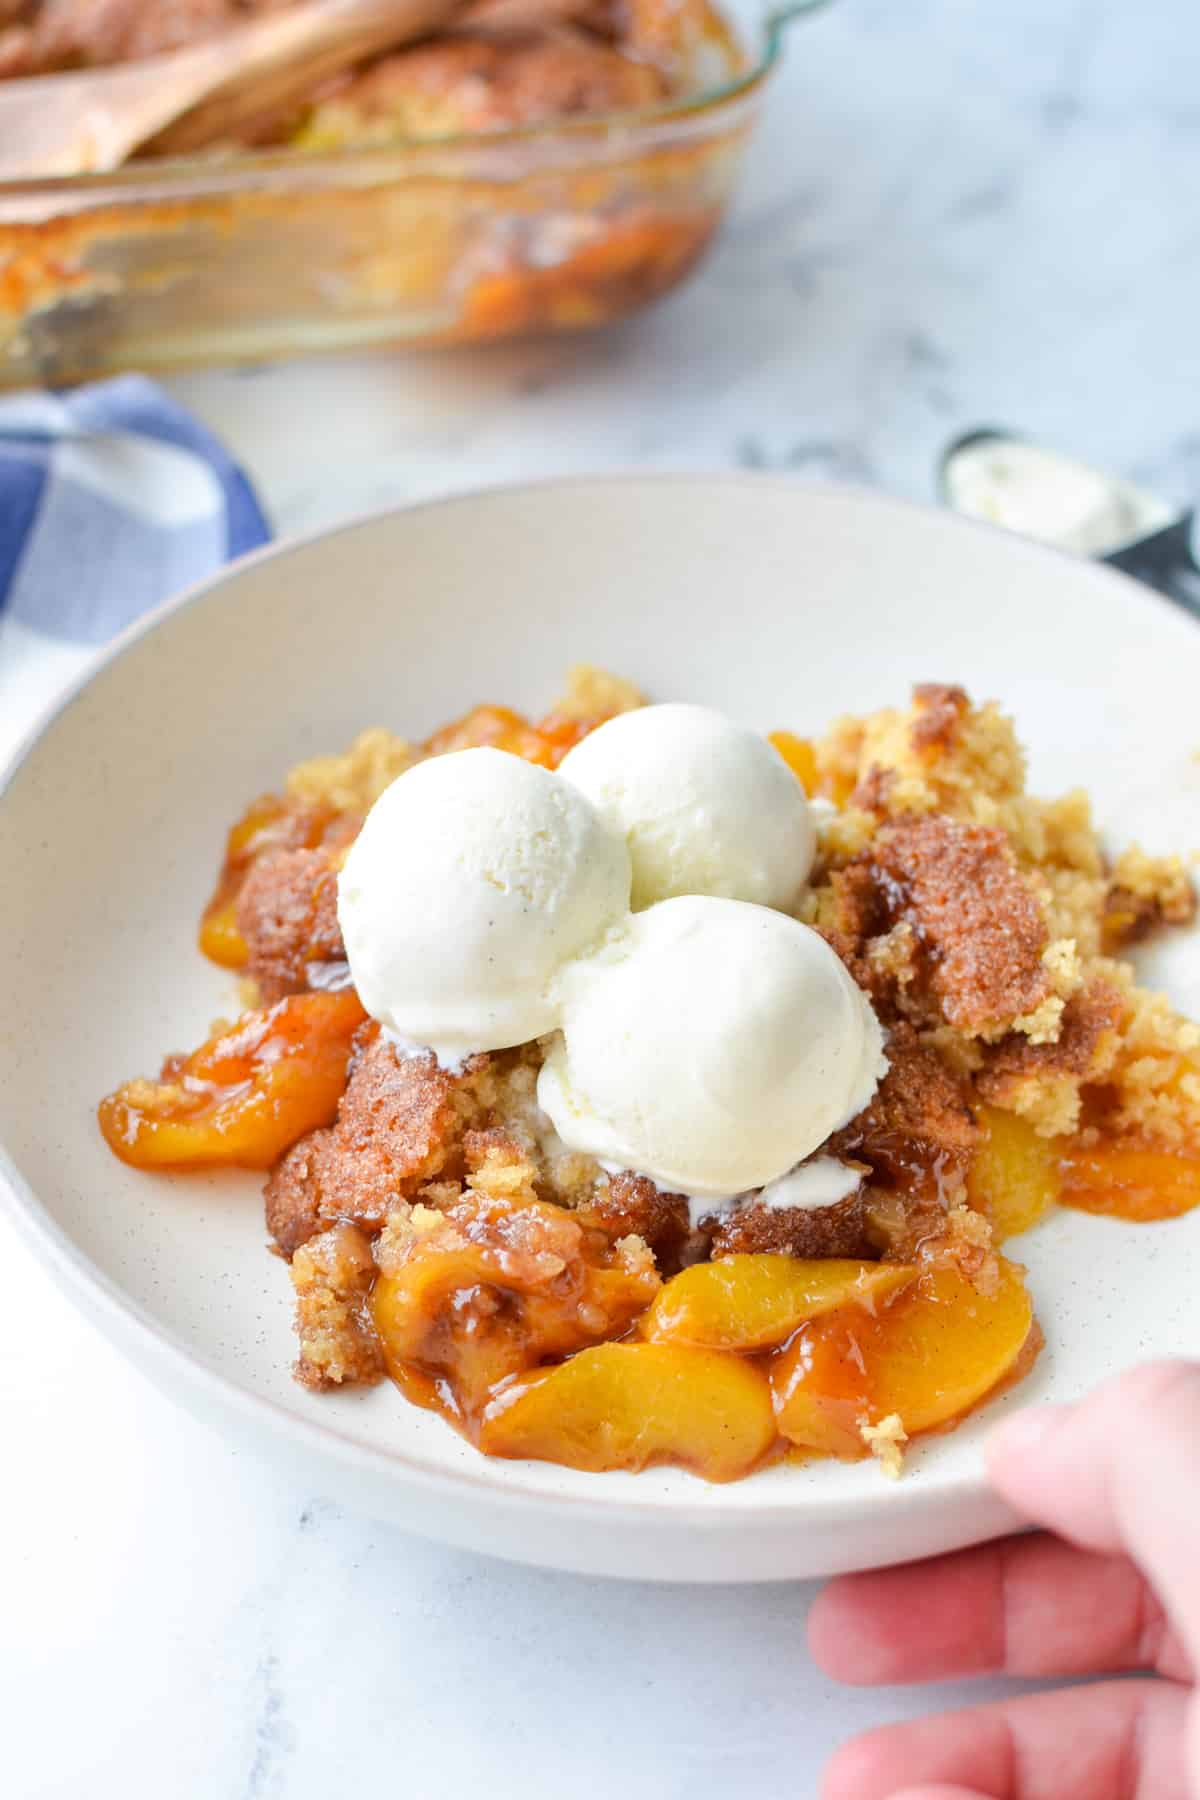 A serving of sourdough peach cobbler with several scoops of vanilla ice cream.